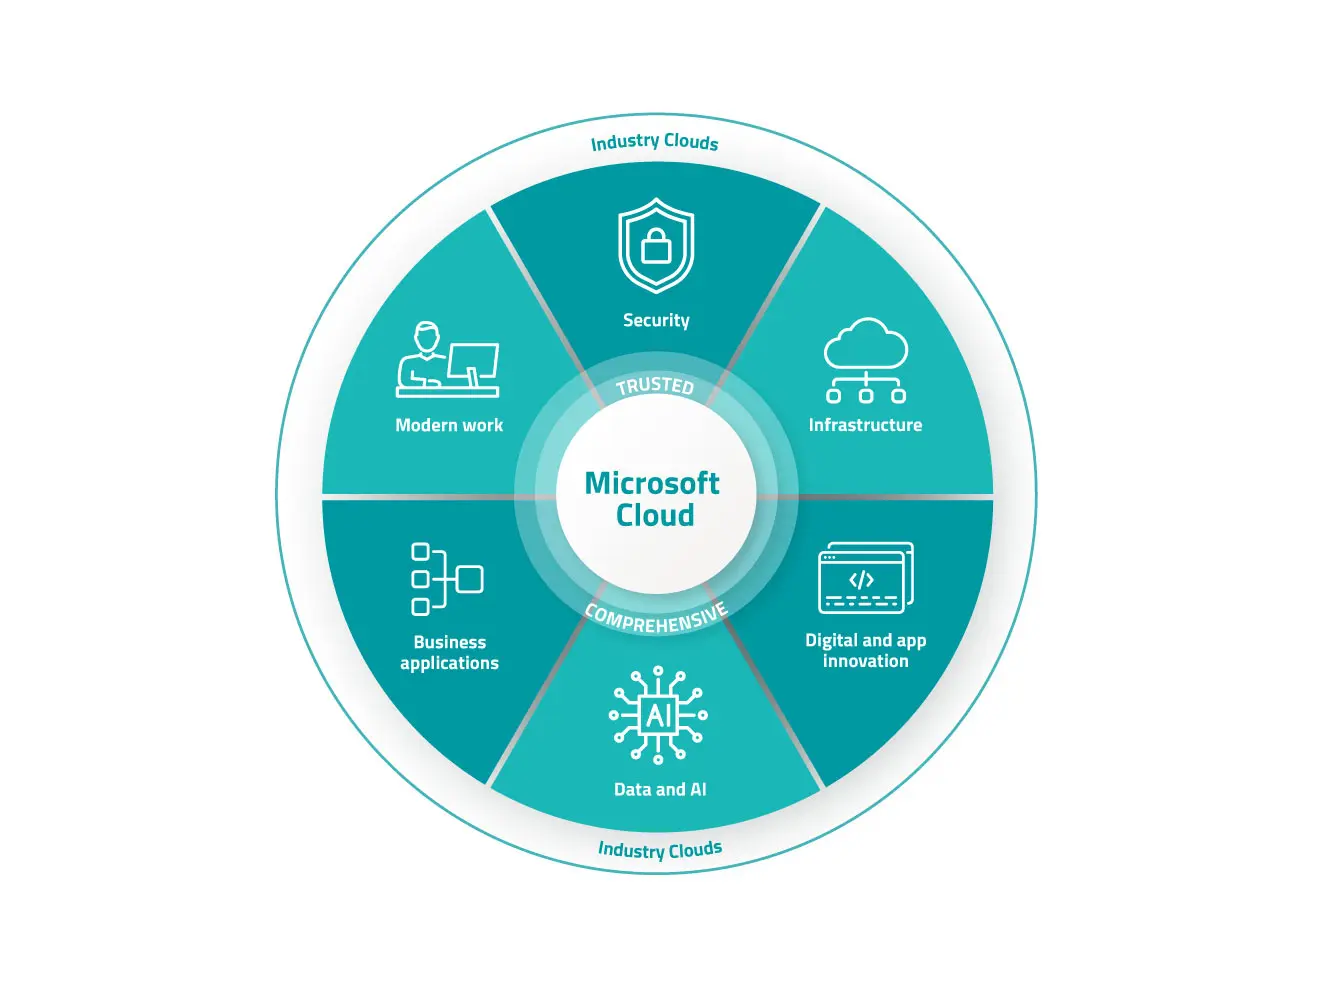 Diagram illustrating the components of Microsoft Cloud, including Security, Infrastructure, Digital & App Innovation, Data & AI, Business Applications, and Modern Work.